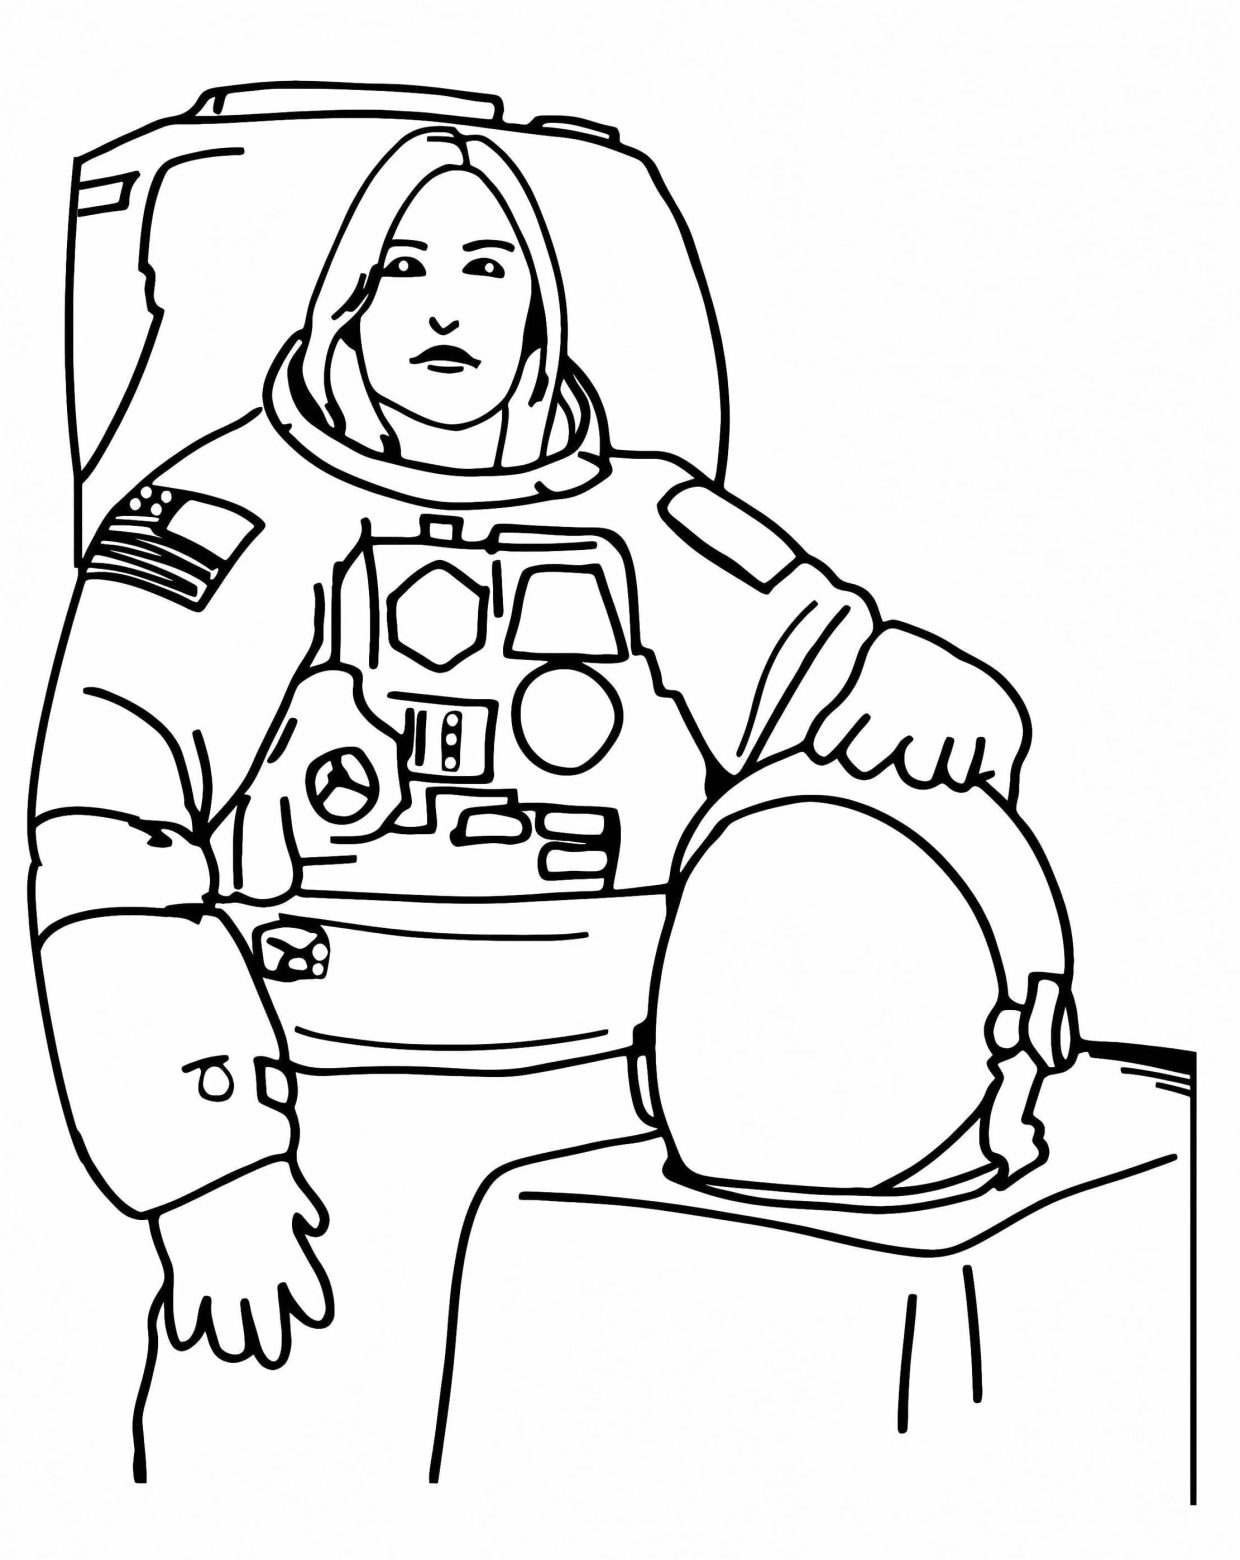 Printable Nasa Coloring Pages Free For Kids And Adults